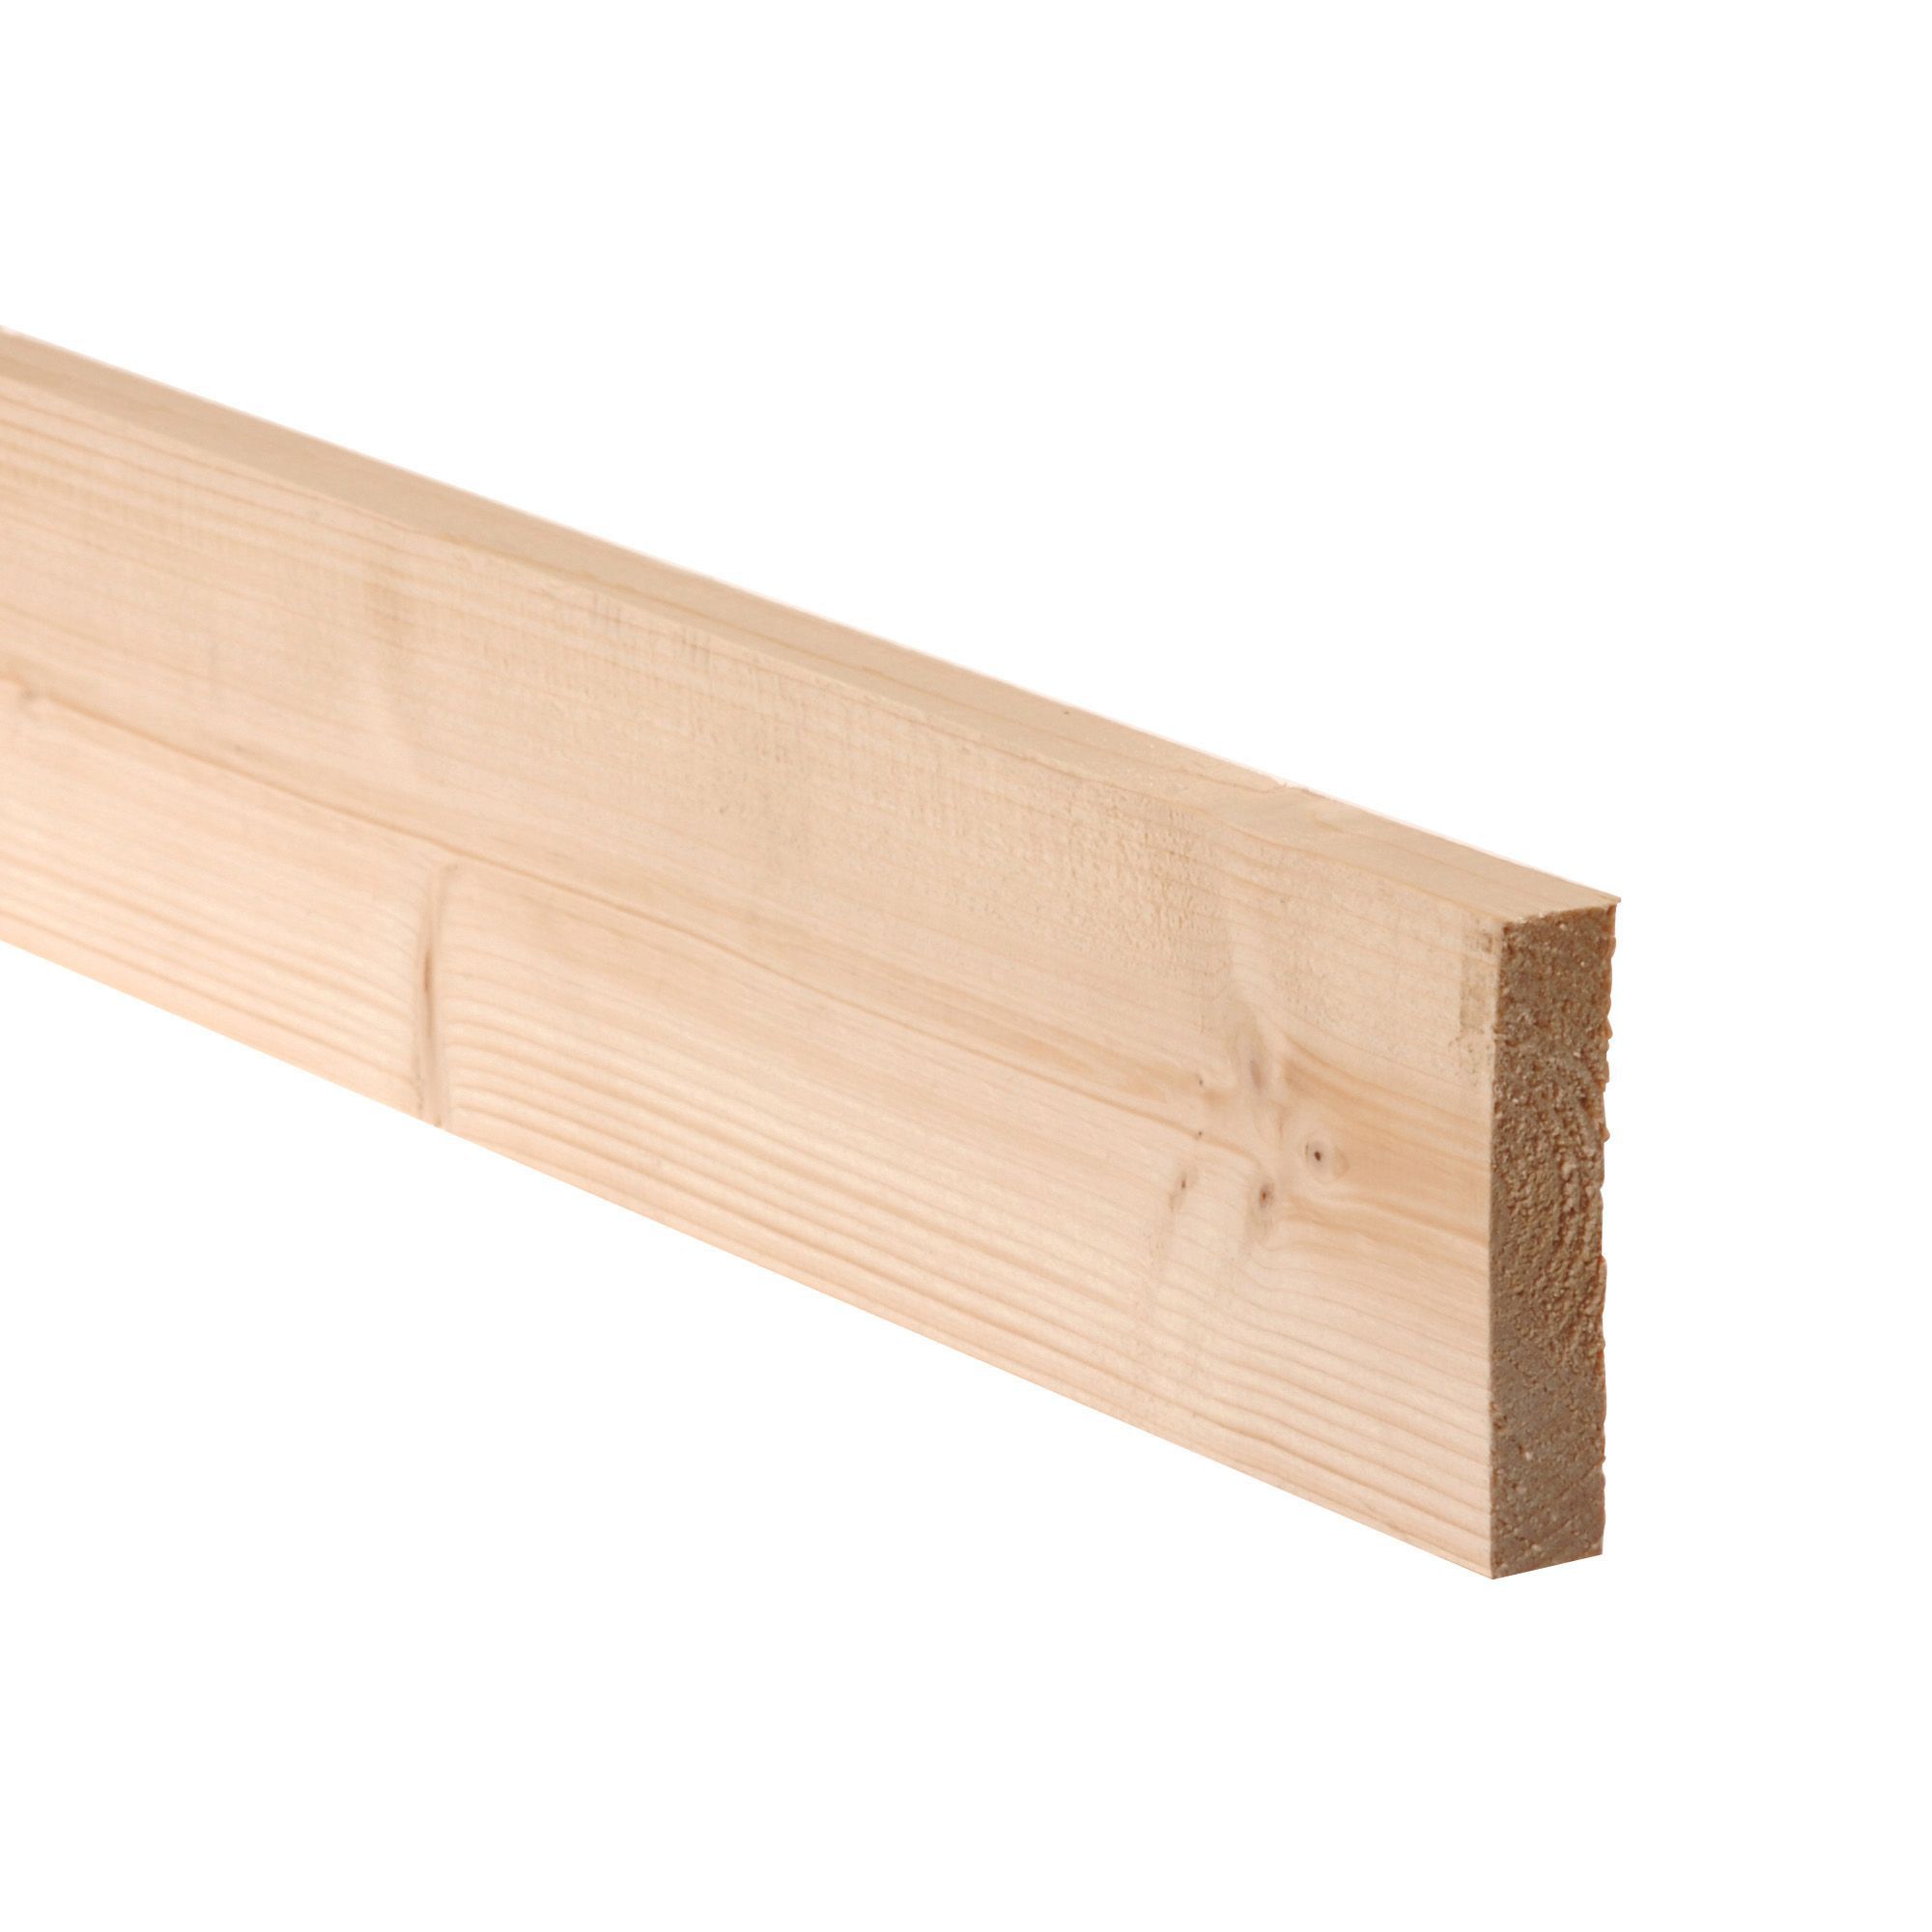 Smooth Planed Square edge Spruce Timber (L)2.1m (W)106mm (T)28mm 253279, Pack of 6